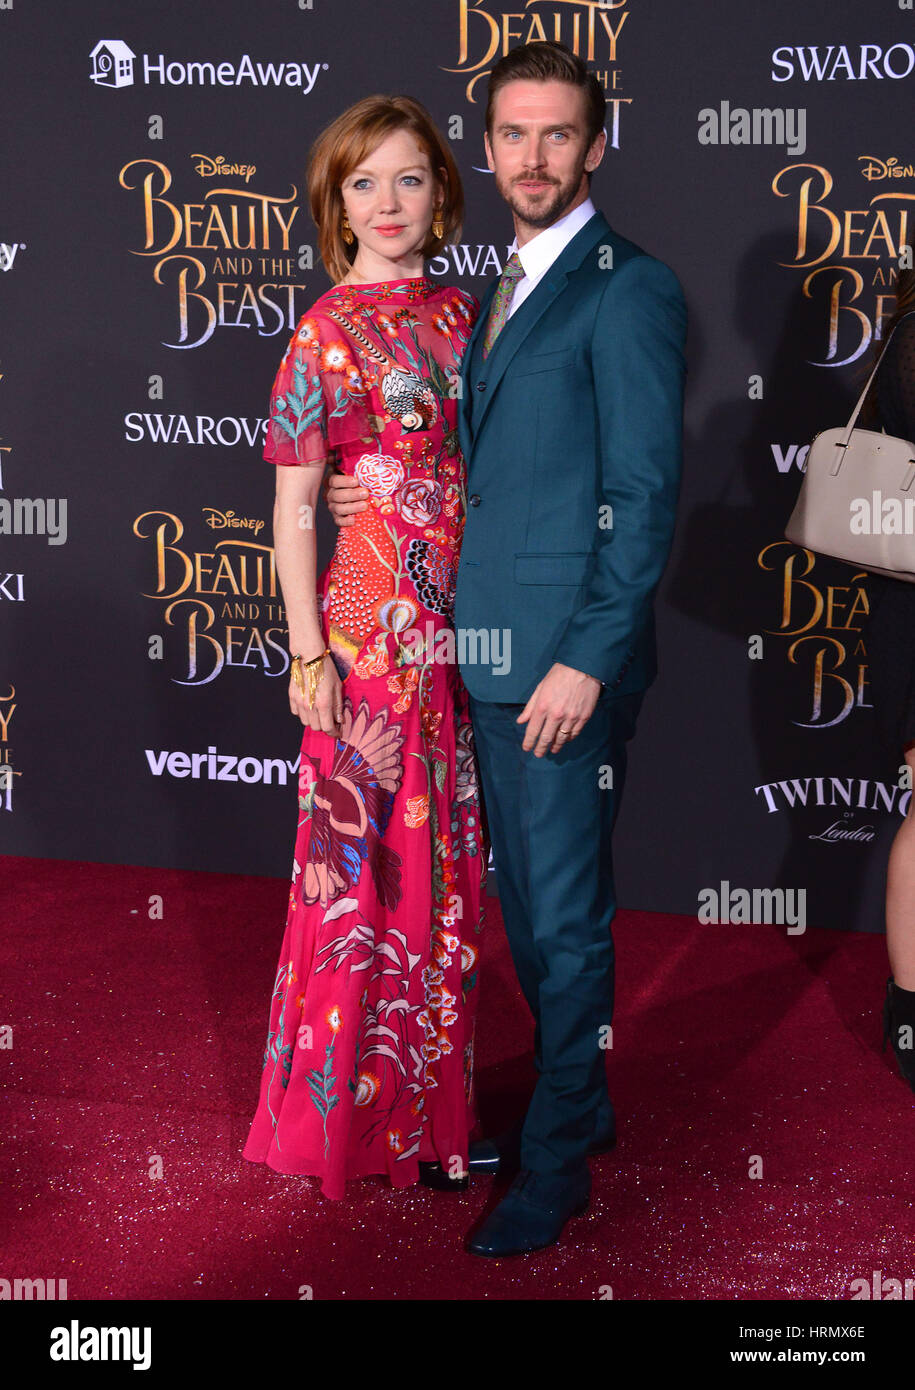 Los Angeles, USA. 02nd Mar, 2017.  Susie Hariet, Dan Stevens 088 at the Disney s 'Beauty and the Beast premiere at El Capitan Theatre in Los Angeles. March 2, 2017 Credit: Tsuni / USA/Alamy Live News Stock Photo